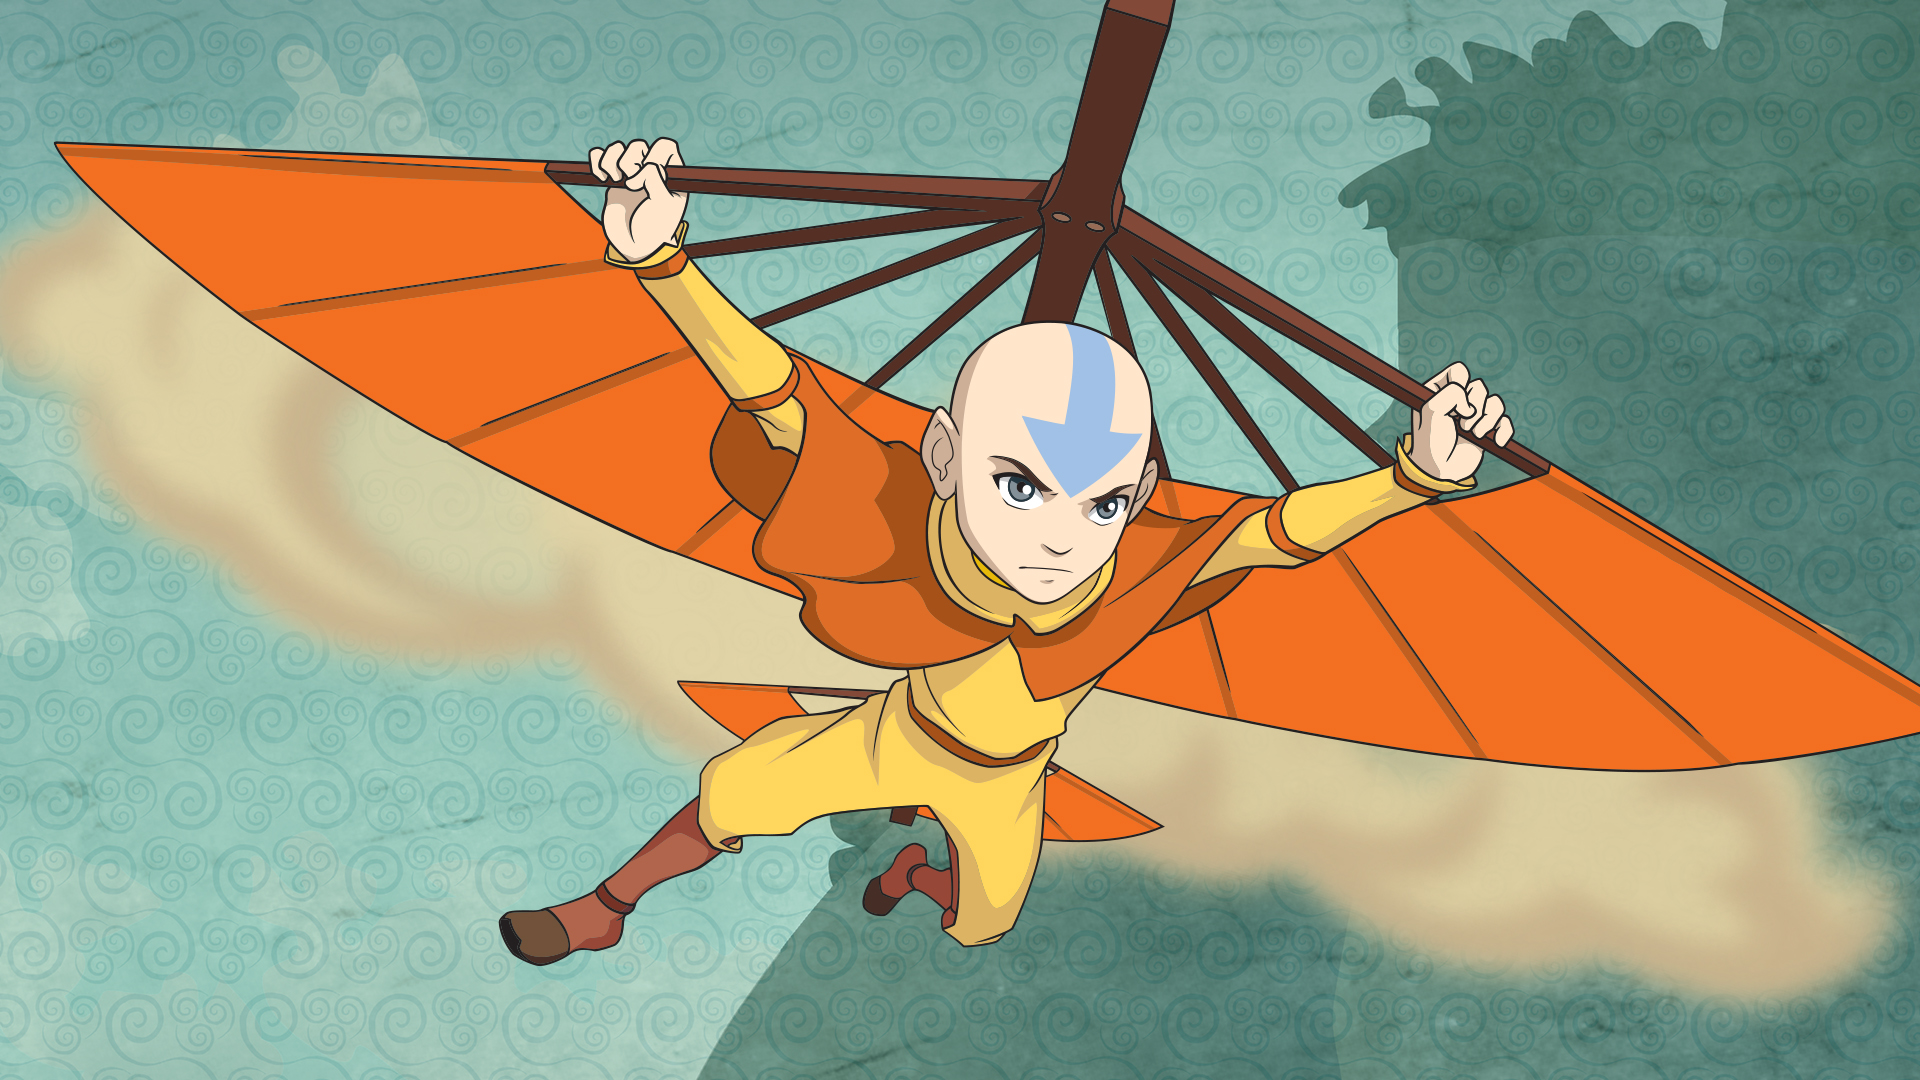 avatar the last airbender free online show